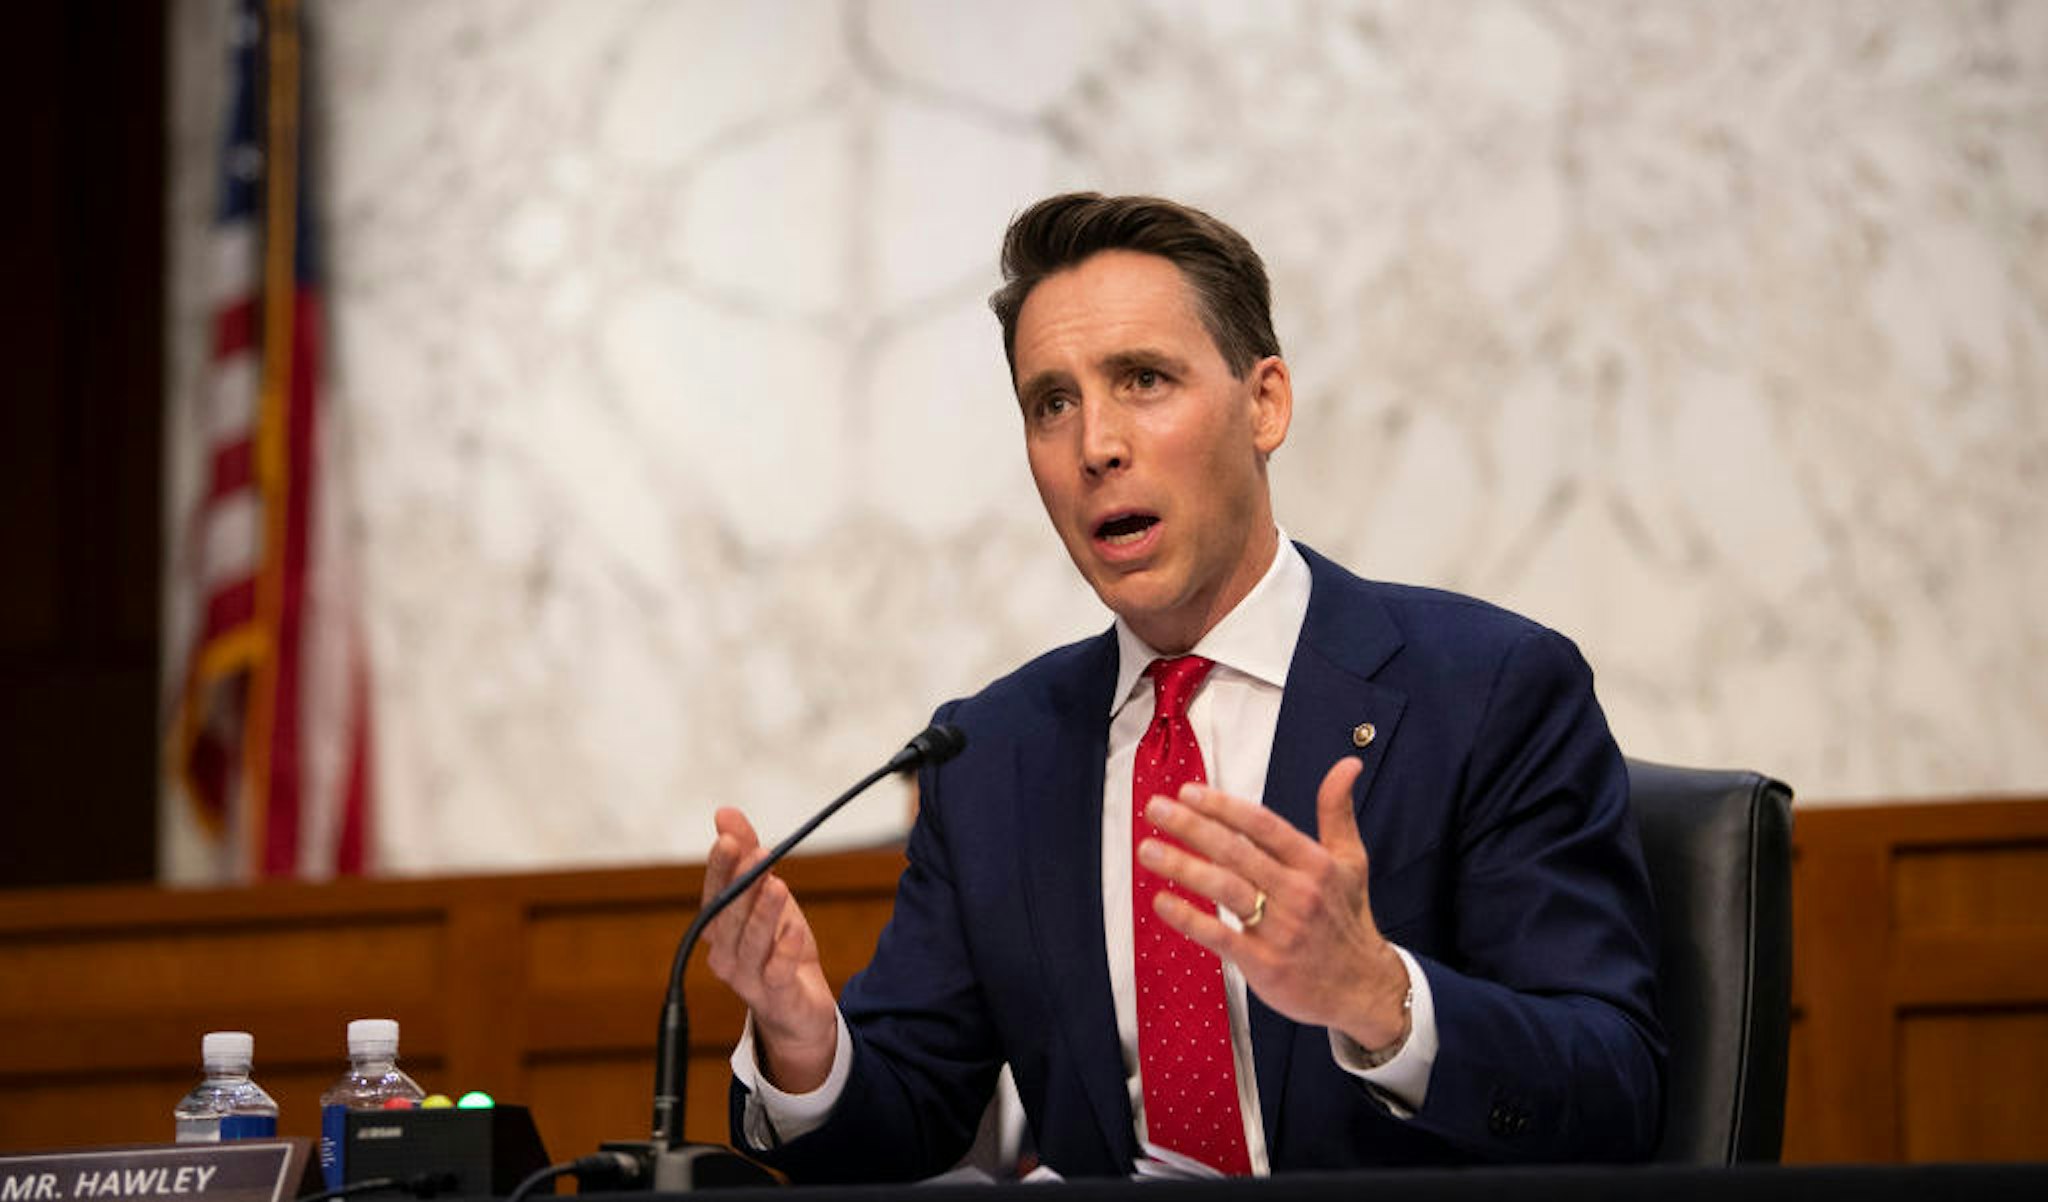 WASHINGTON, DC - OCTOBER 14: U.S. Sen. Josh Hawley (R-MO) questions Supreme Court nominee Judge Amy Coney Barrett as she testifies before the Senate Judiciary Committee on the third day of her Supreme Court confirmation hearing on Capitol Hill on October 14, 2020 in Washington, DC. Barrett was nominated by President Donald Trump to fill the vacancy left by Justice Ruth Bader Ginsburg who passed away in September. (Photo by Caroline Brehman-Pool/Getty Images)